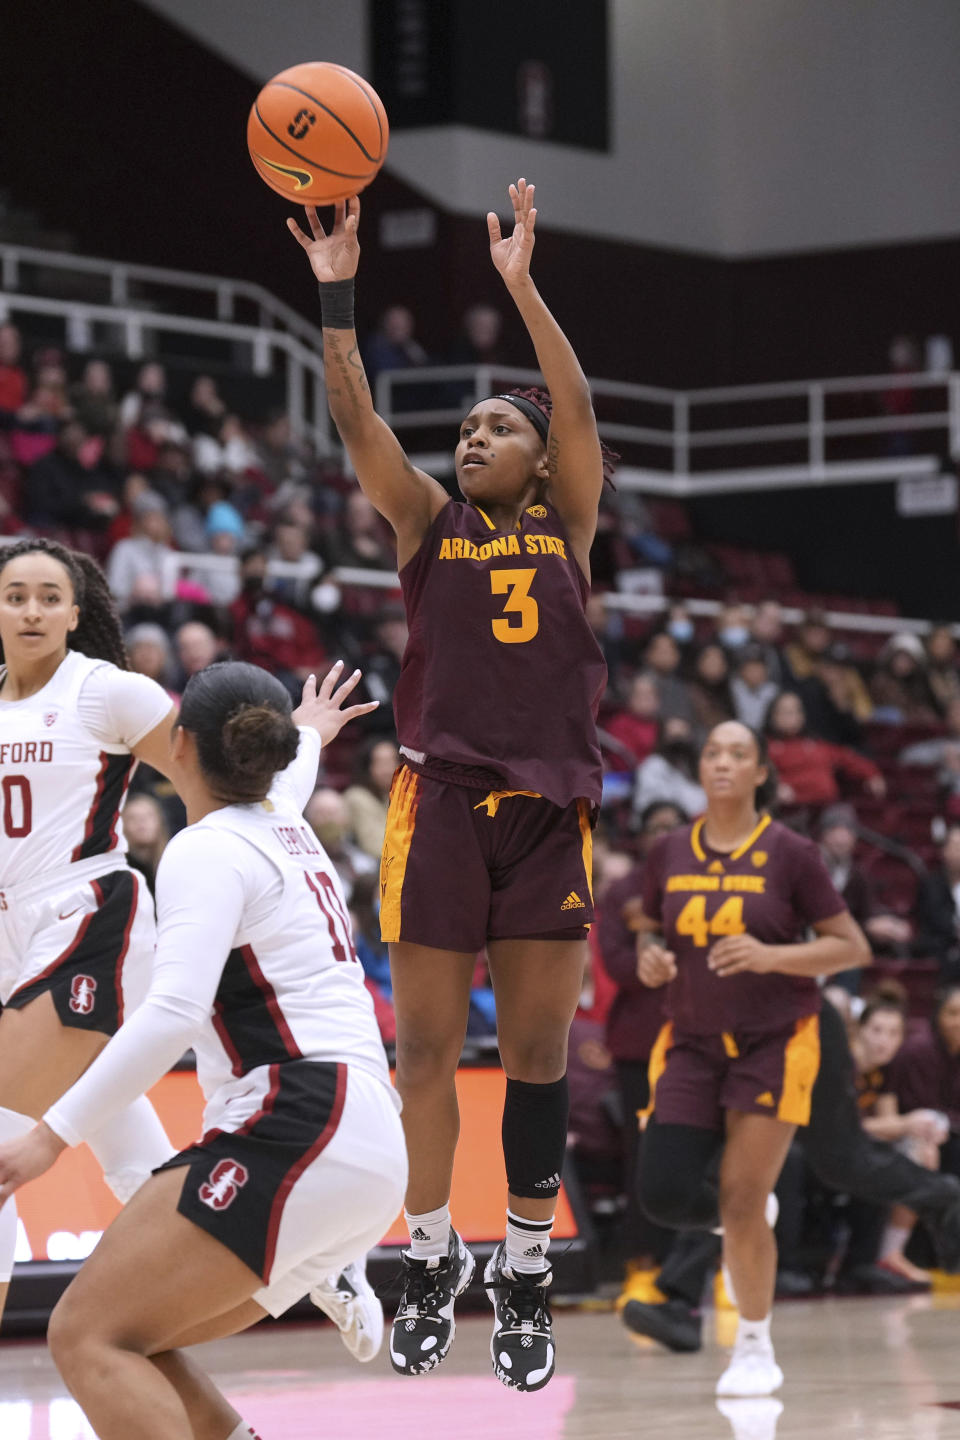 Arizona State guard Tyi Skinner (3) shoots over Stanford guard Talana Lepolo, front, during the first half of an NCAA college basketball game Saturday, Dec. 31, 2022, in Stanford, Calif. (AP Photo/Darren Yamashita)